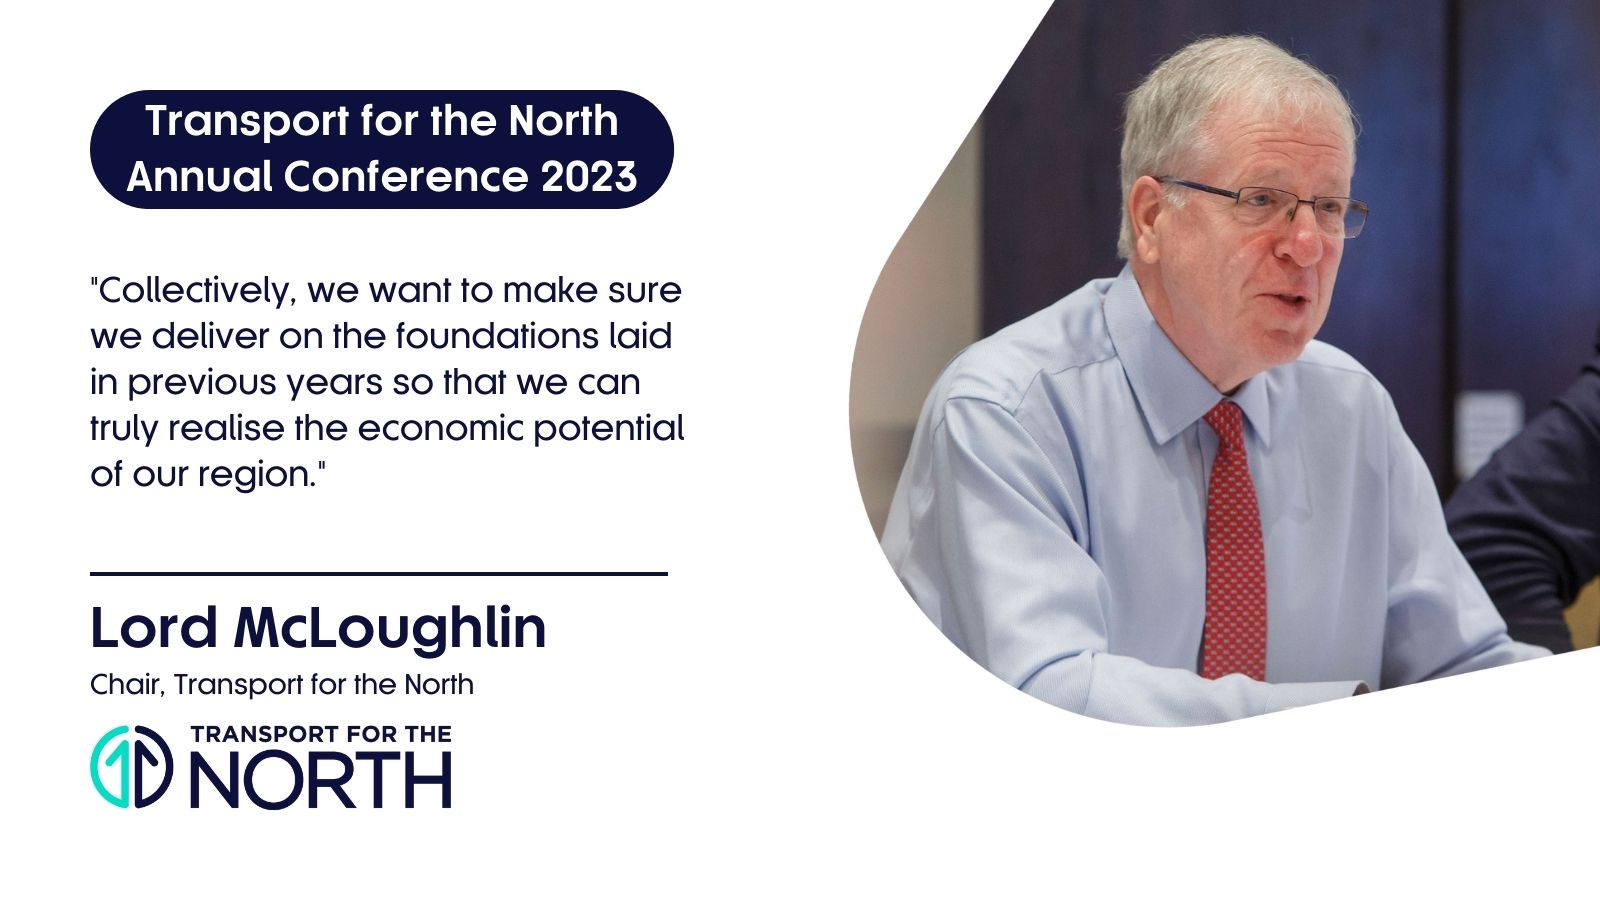 Lord McLoughlin comments ahead of Transport for the North's Annual Conference 2023